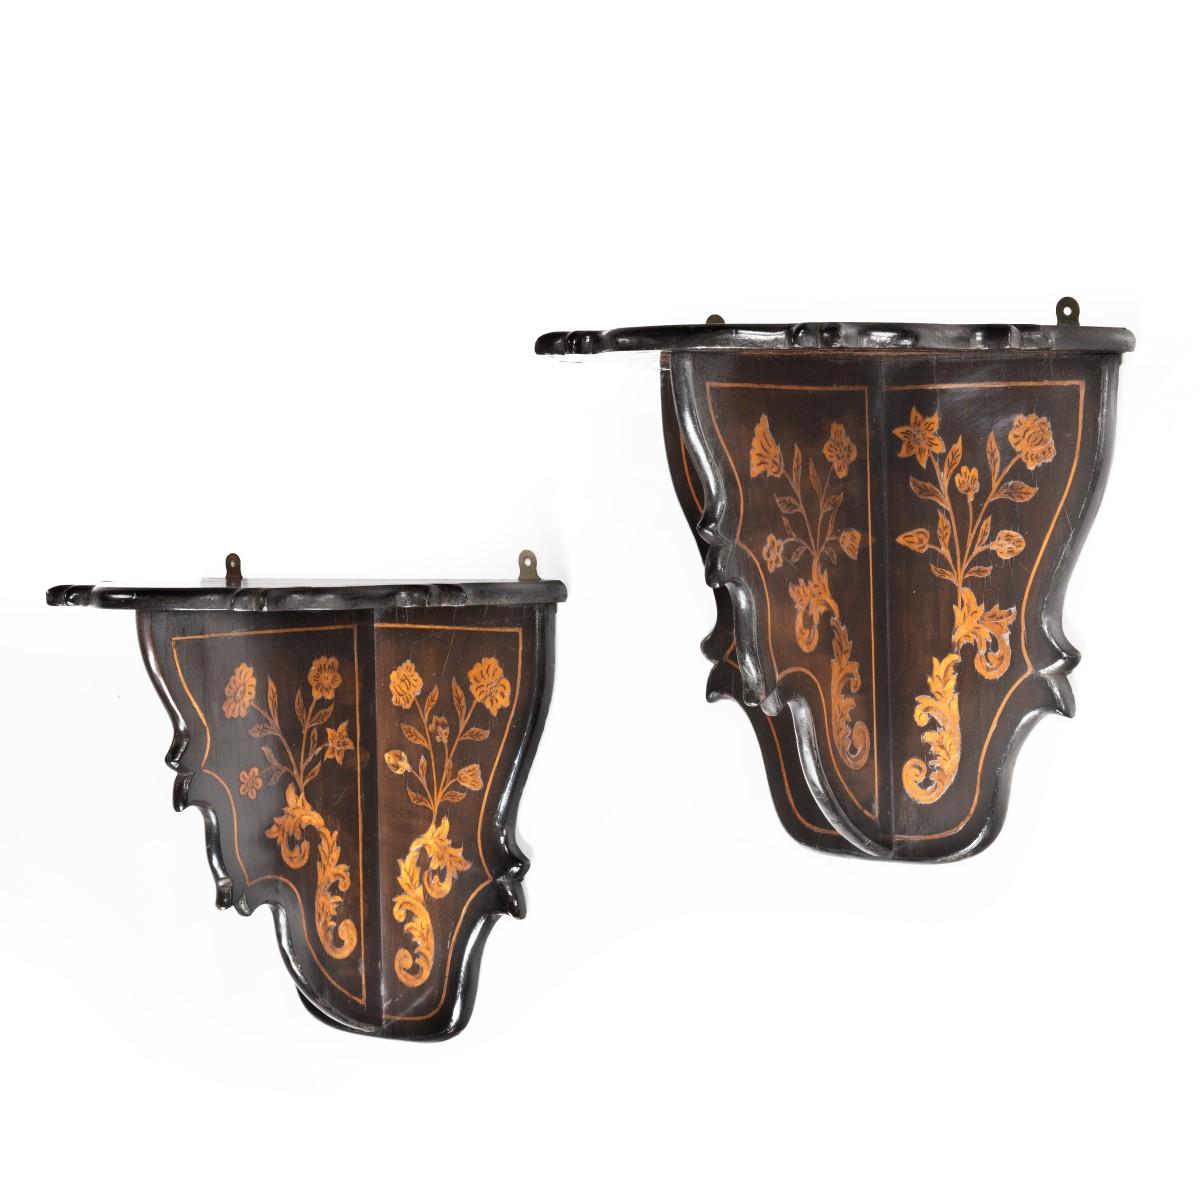 A pair of Dutch marquetry wall brackets, each with a triangular serpentine top, a similar shaped back and central support, decorated overall with a gilt-painted single linear border on an ebonized ground, the supports inlaid with carnation sprays